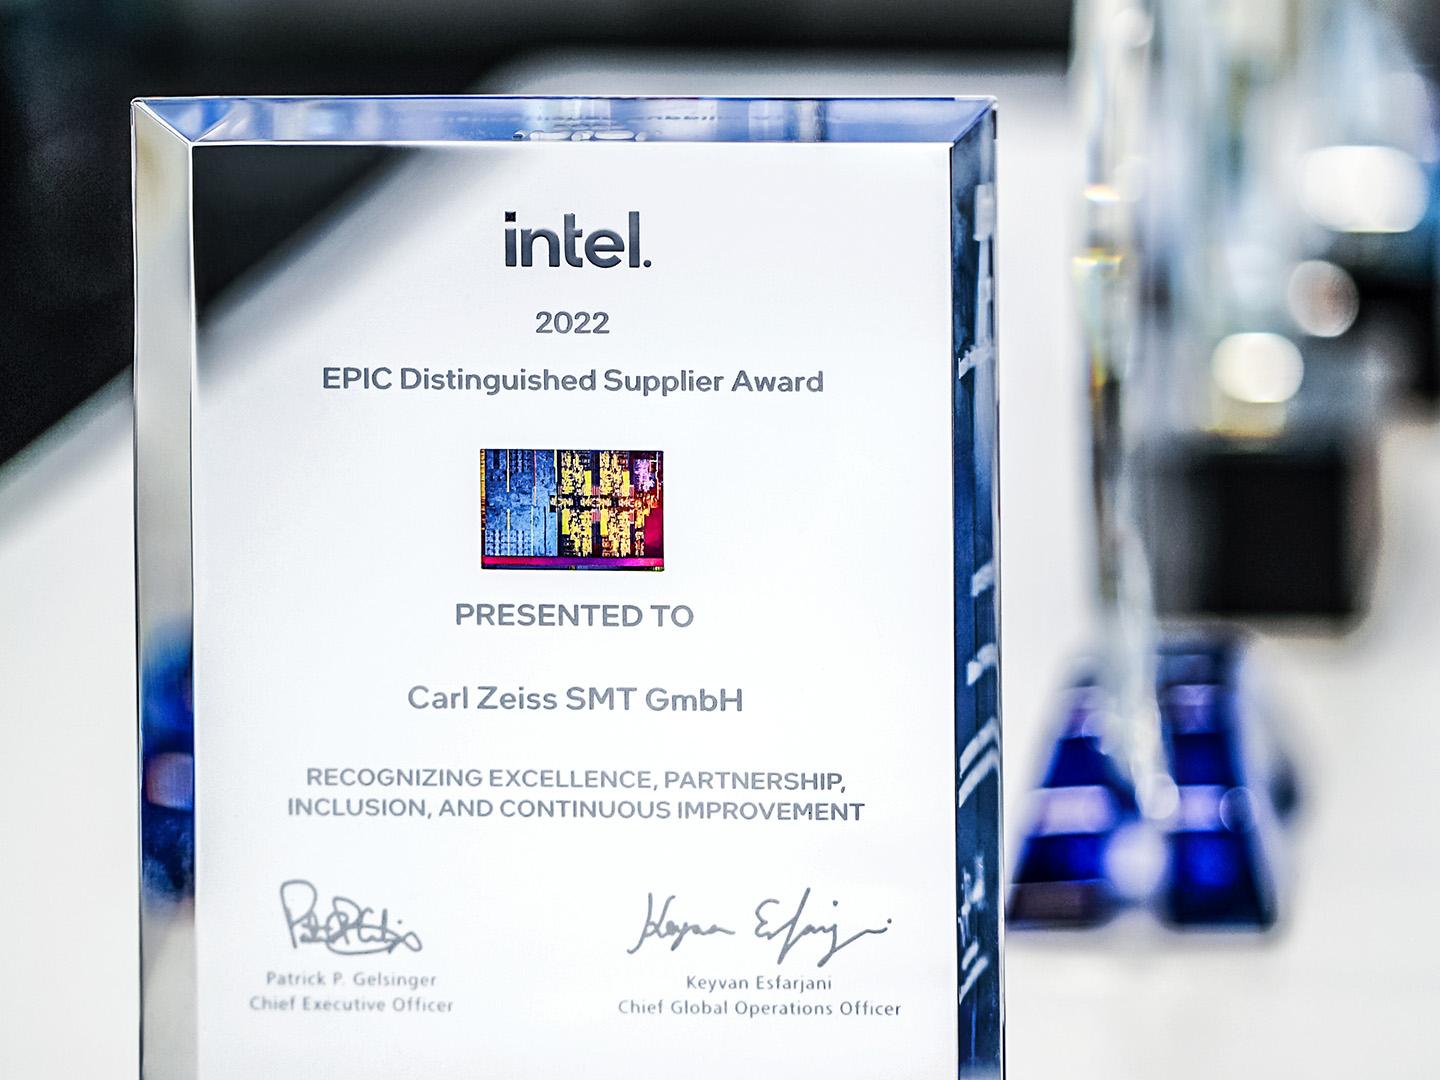 ZEISS earns Intel’s 2022 EPIC Distinguished Supplier Award